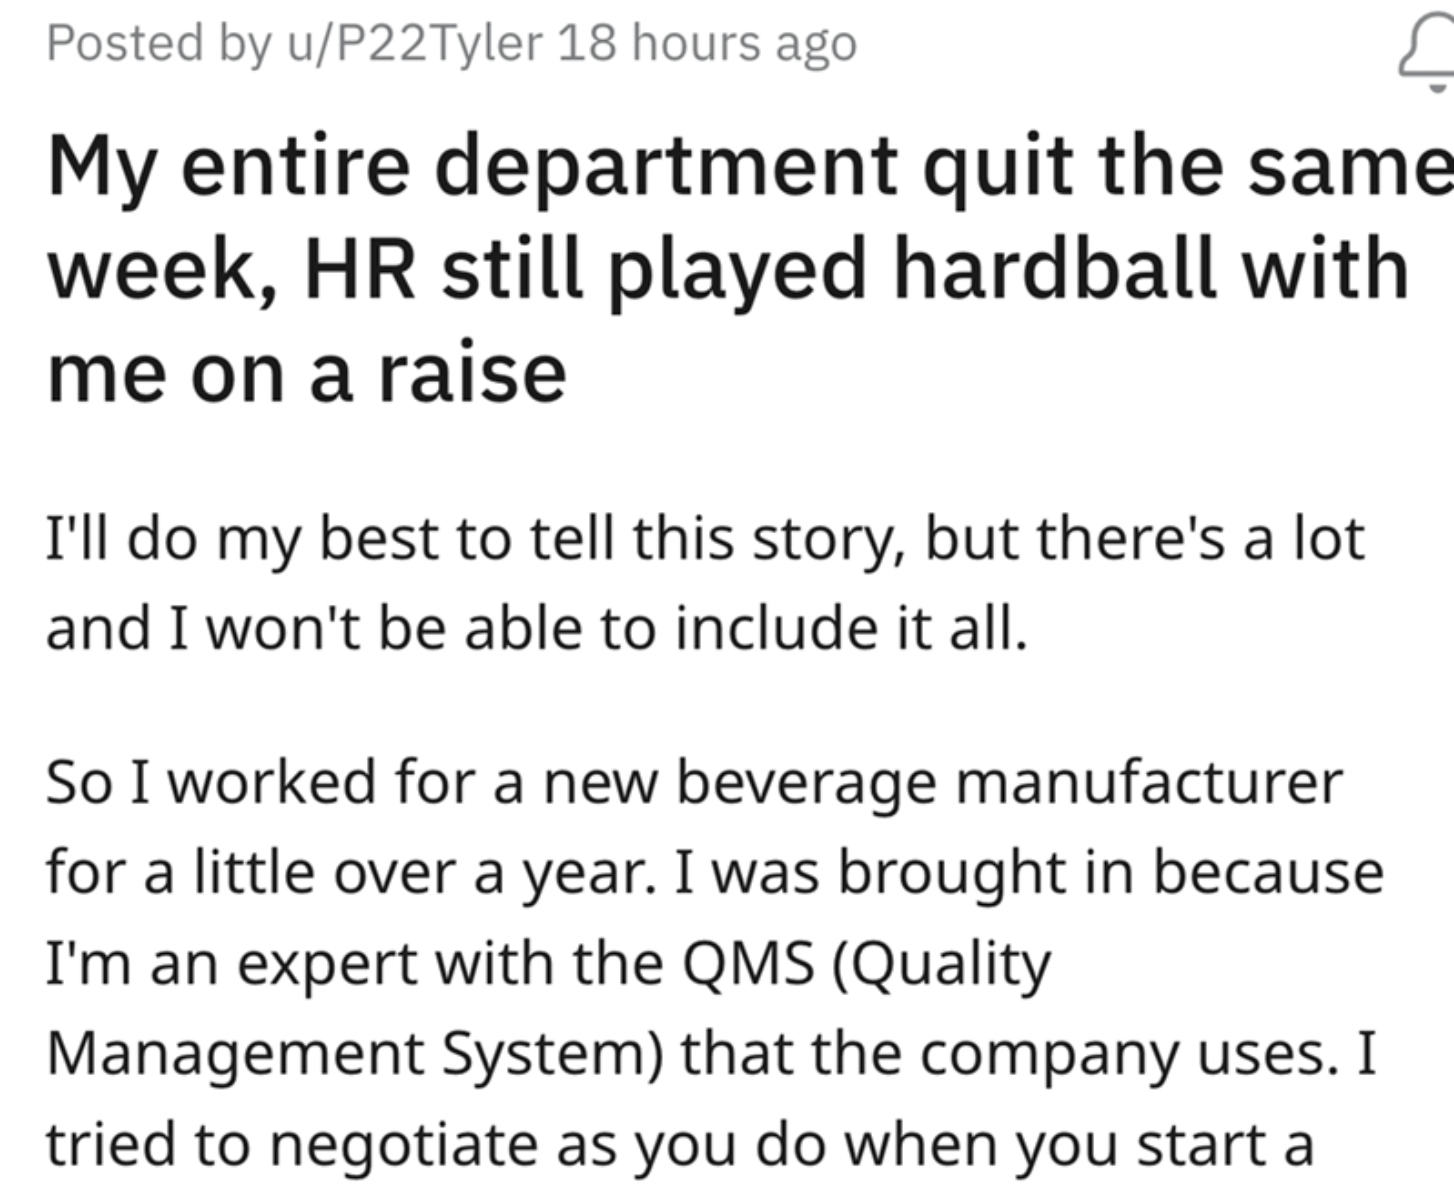 paper - Posted by uP22Tyler 18 hours ago C My entire department quit the same week, Hr still played hardball with me on a raise I'll do my best to tell this story, but there's a lot and I won't be able to include it all. So I worked for a new beverage man